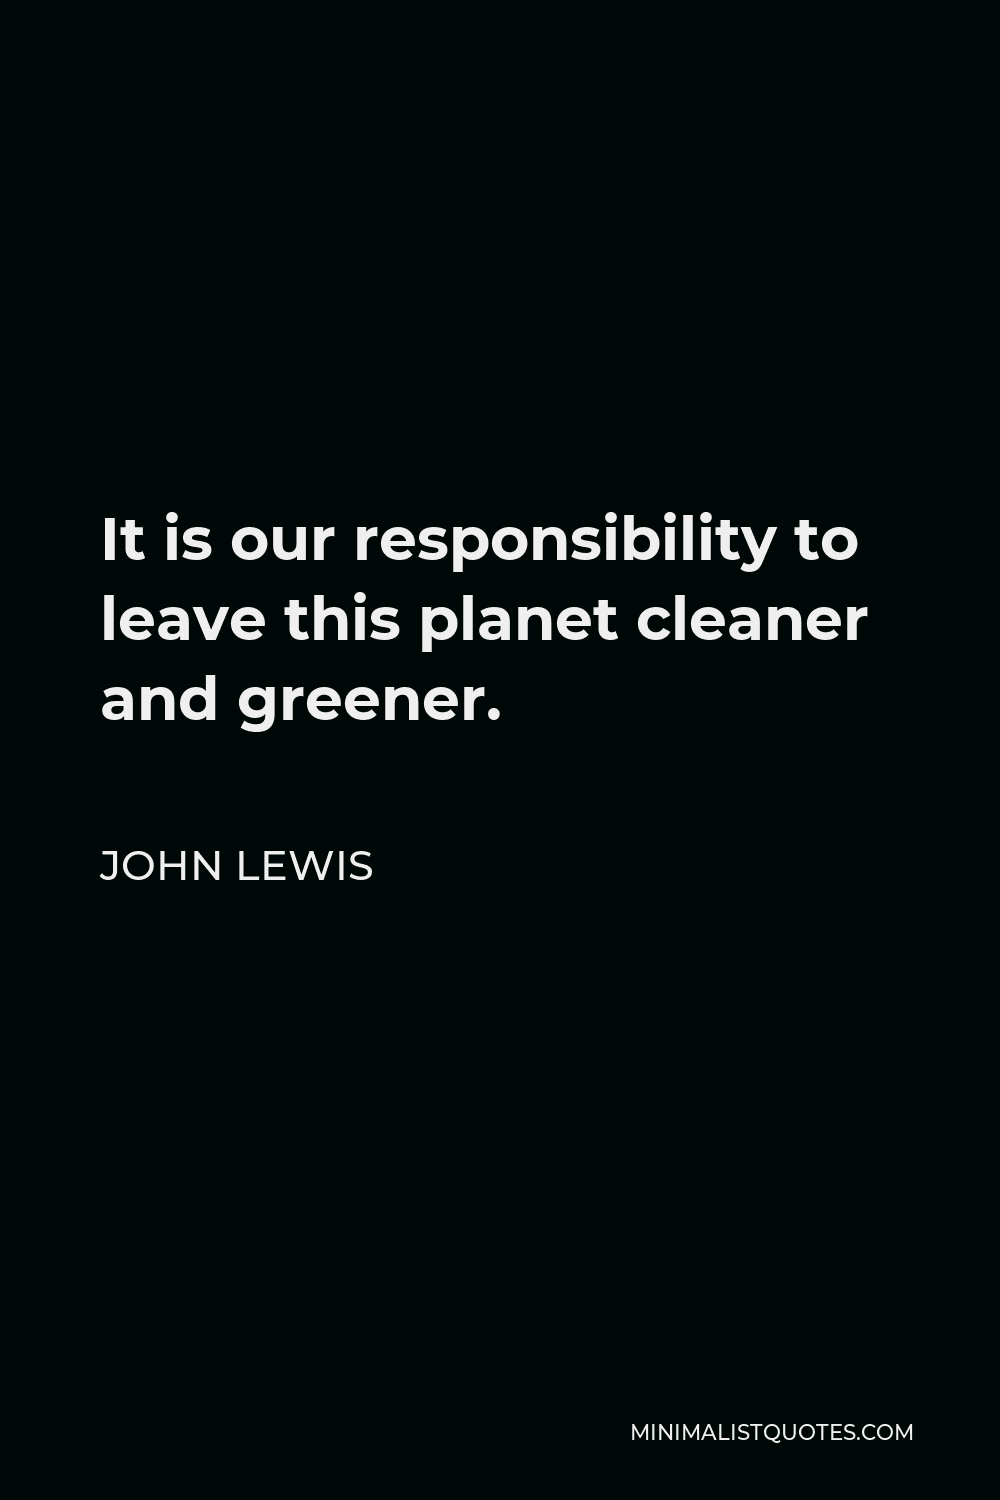 John Lewis Quote - It is our responsibility to leave this planet cleaner and greener.